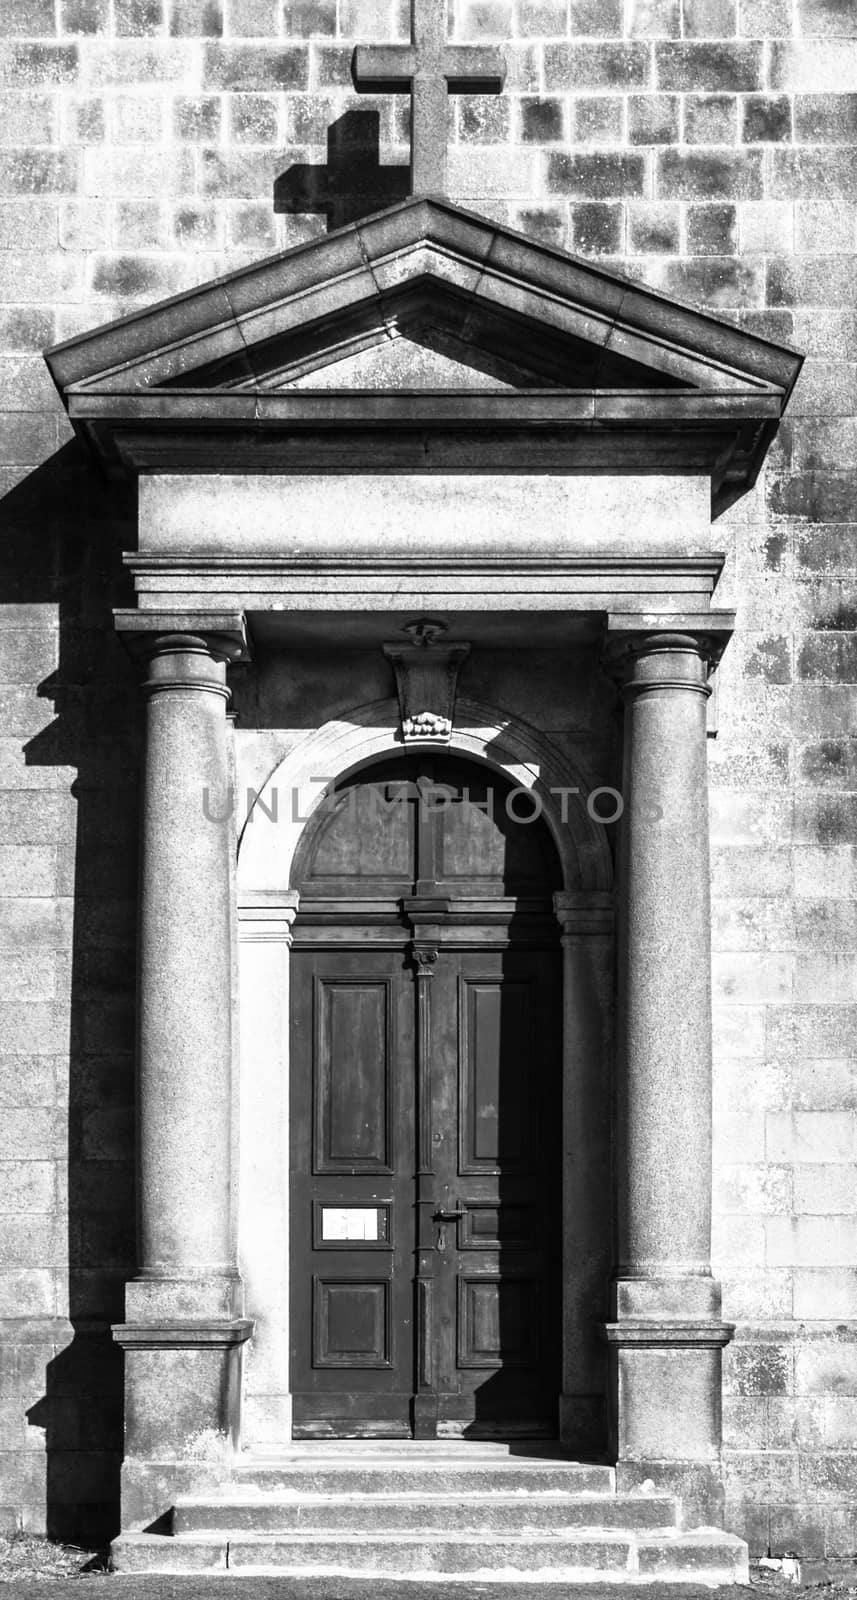 Old wooden church door. Entrance to the St Peter and Paul Church in Tanvald, Czech Republic. Black and white image.